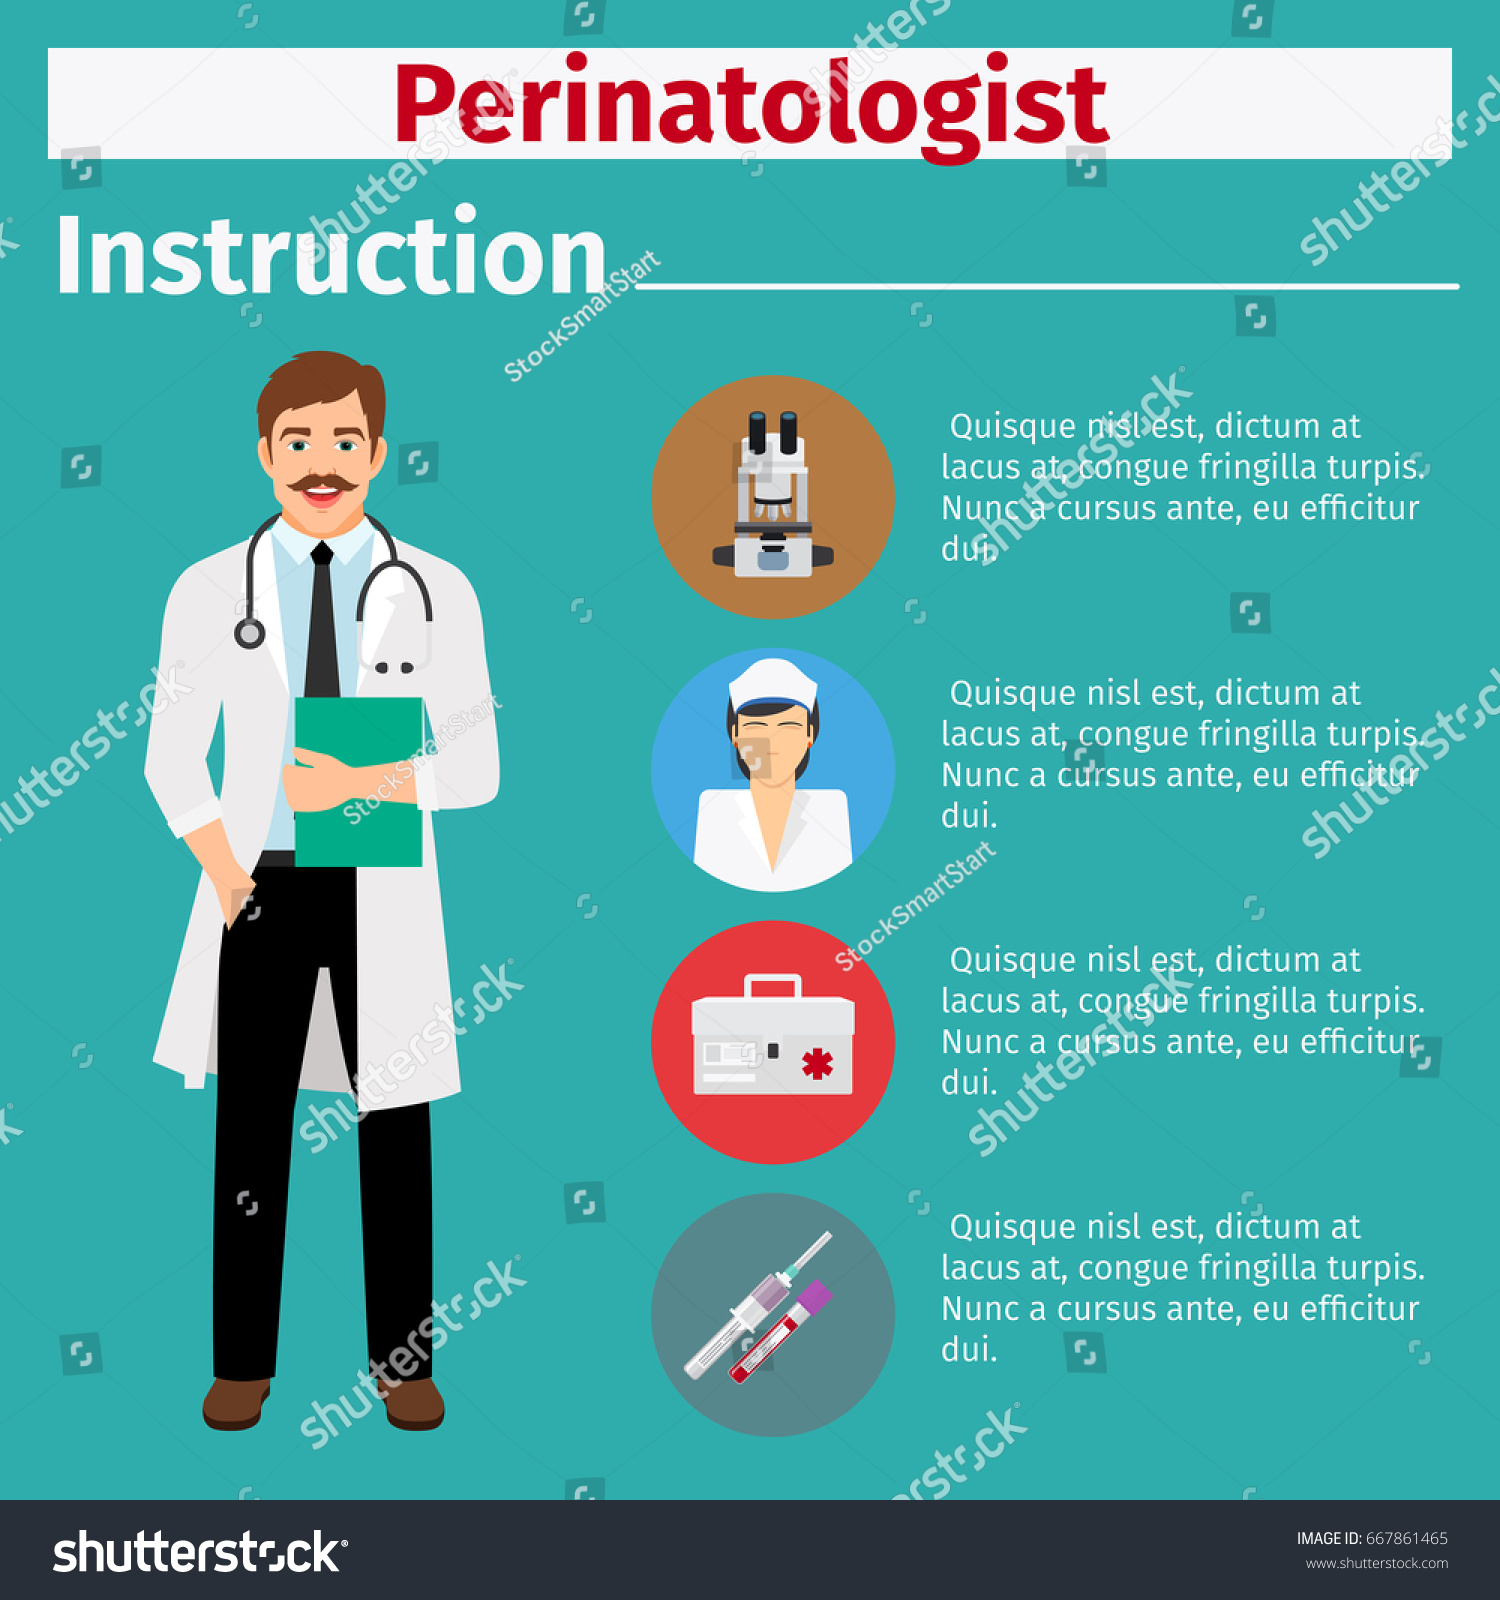 Medical equipment instruction manuals with icons for perinatologist. Vector illustration #667861465